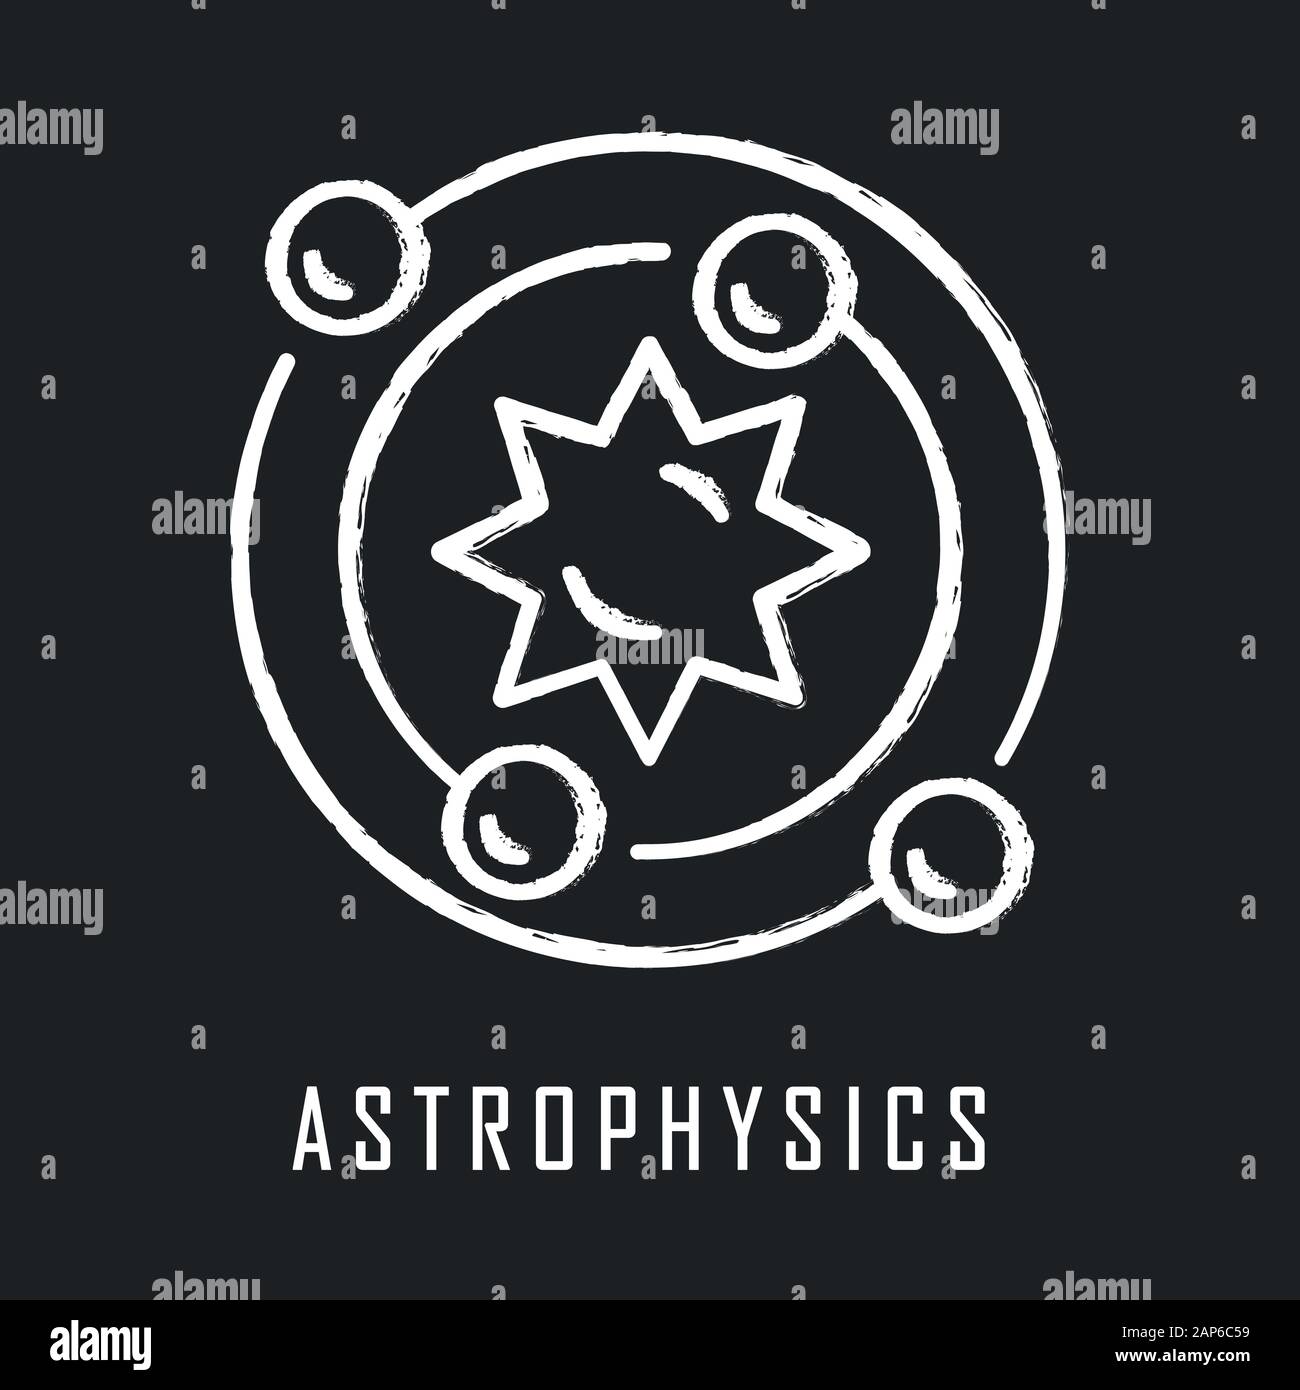 Astrophysics chalk icon. Astronomy branch. Study of universe, stars, planets, galaxies. Astrophysical discoveries. Cosmology, Solar System science. Is Stock Vector